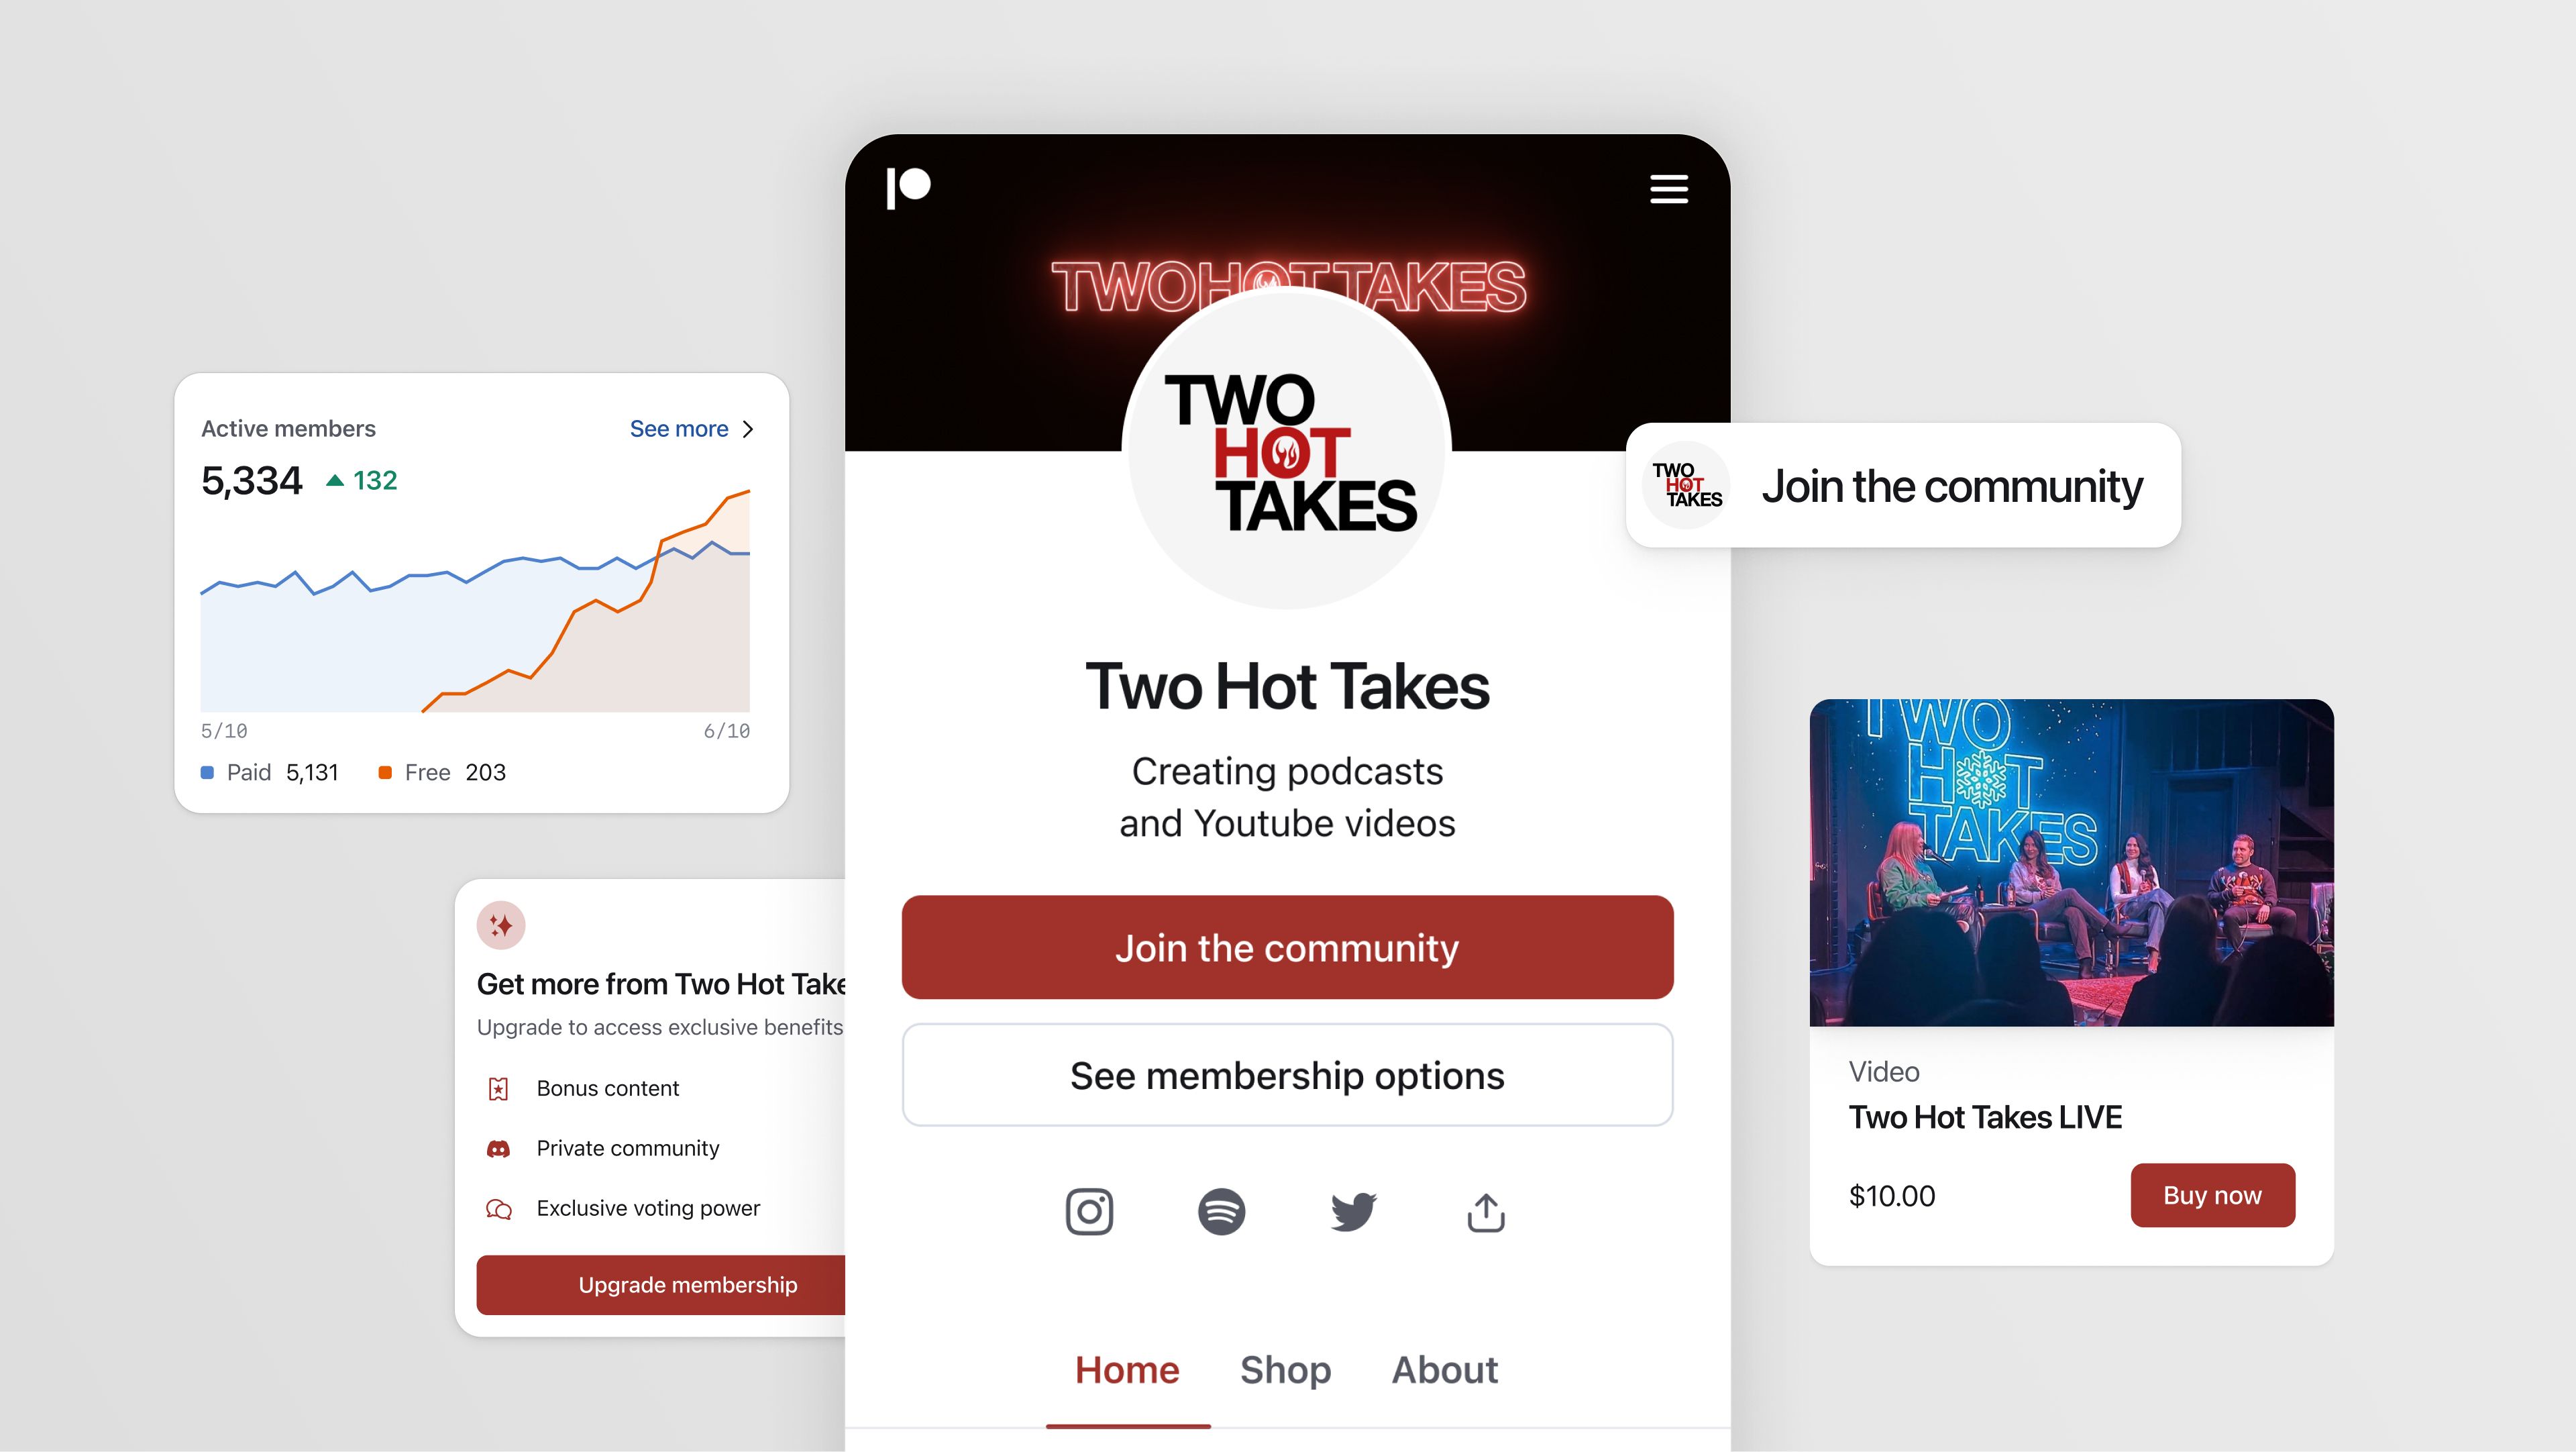 Introducing a new way for creators to share premium content with